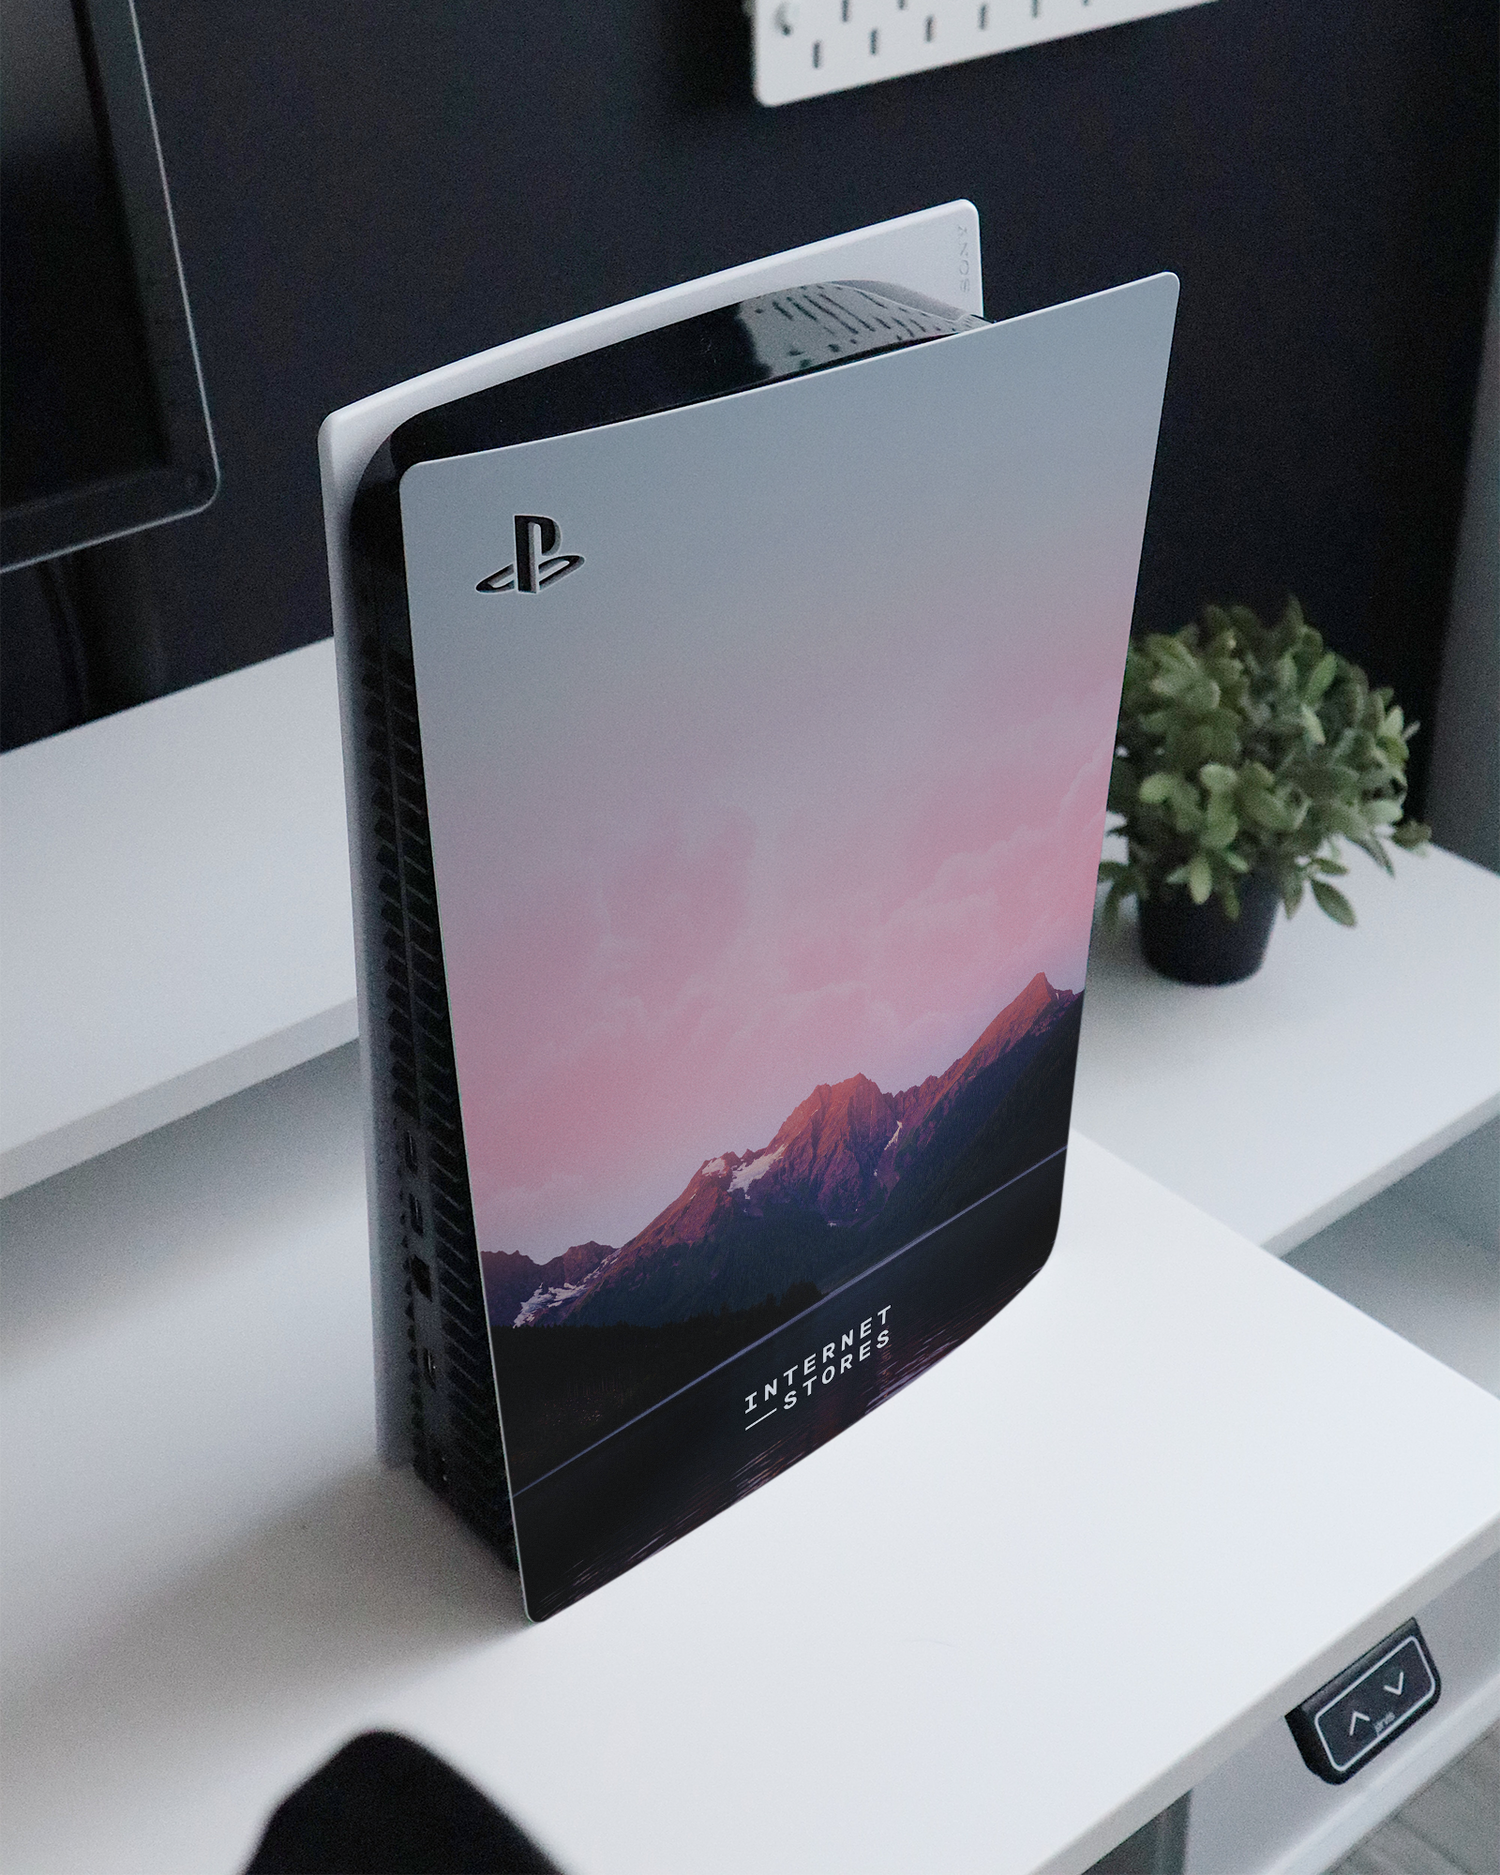 Lake Console Skin for Sony PlayStation 5 standing on a sideboard 